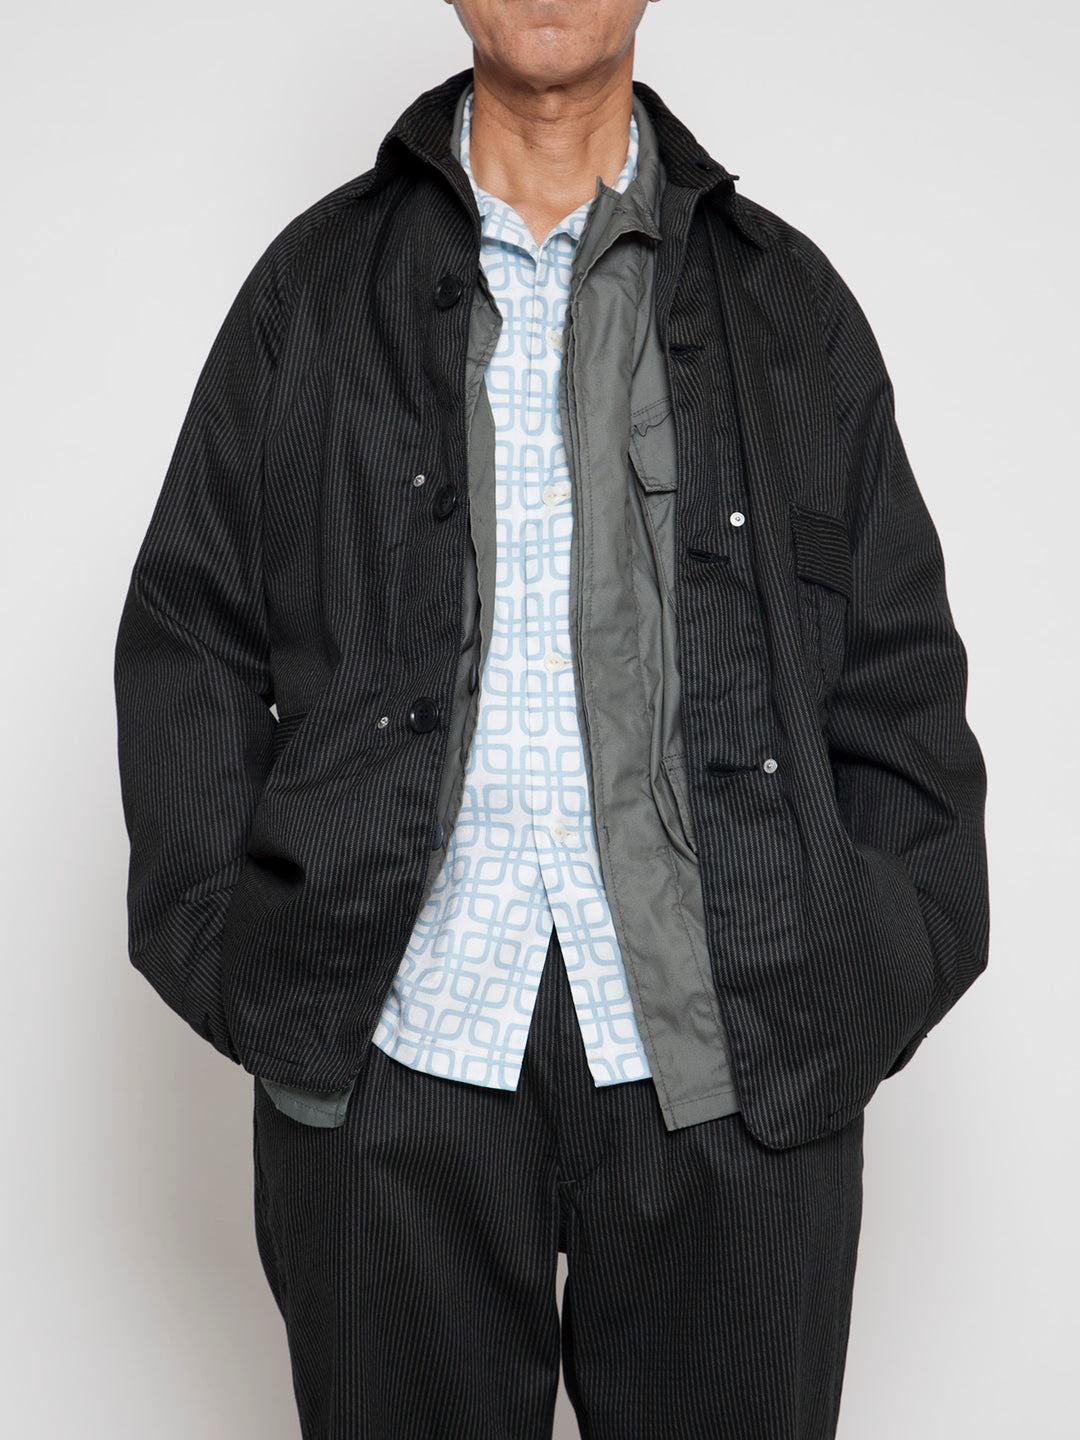 【DELIVERY】CJ001 - UTILITY GAME JACKET